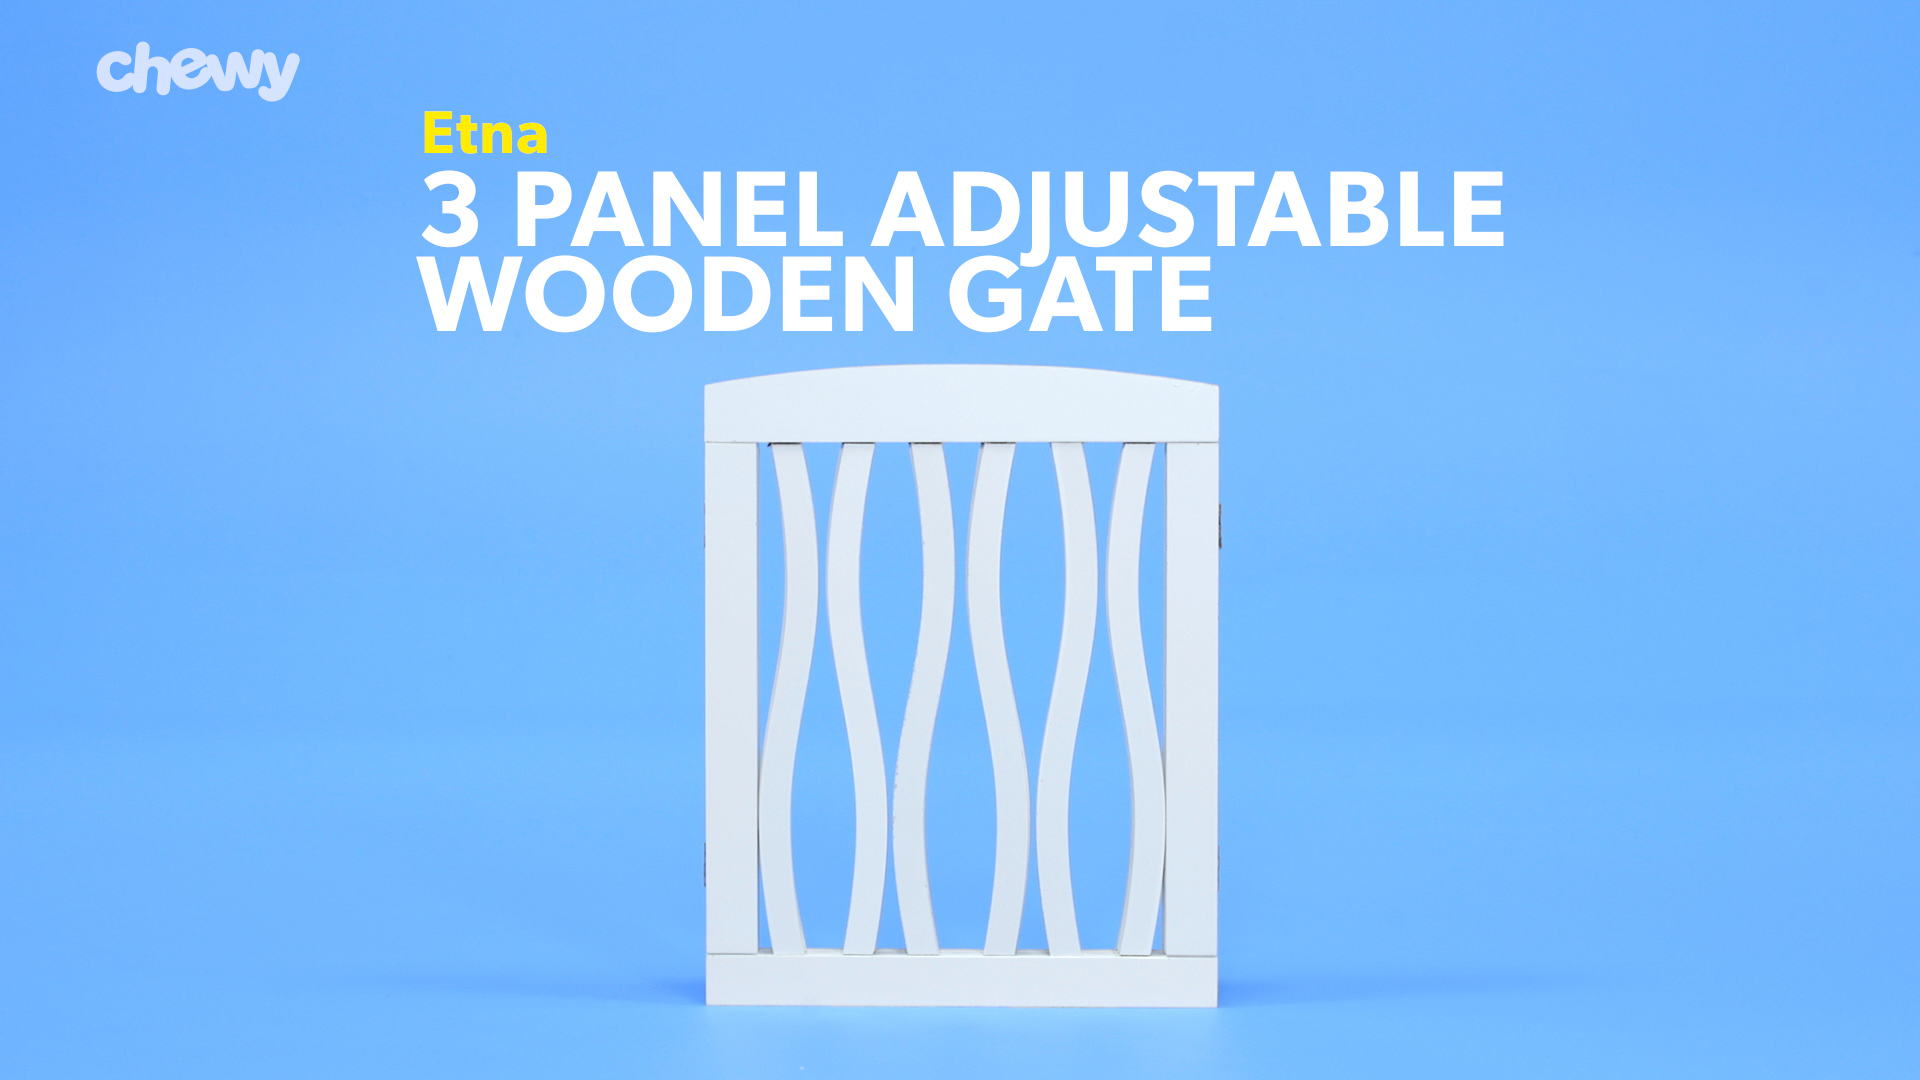 ETNA 3 Panel Adjustable Wooden Gate, White - Chewy.com